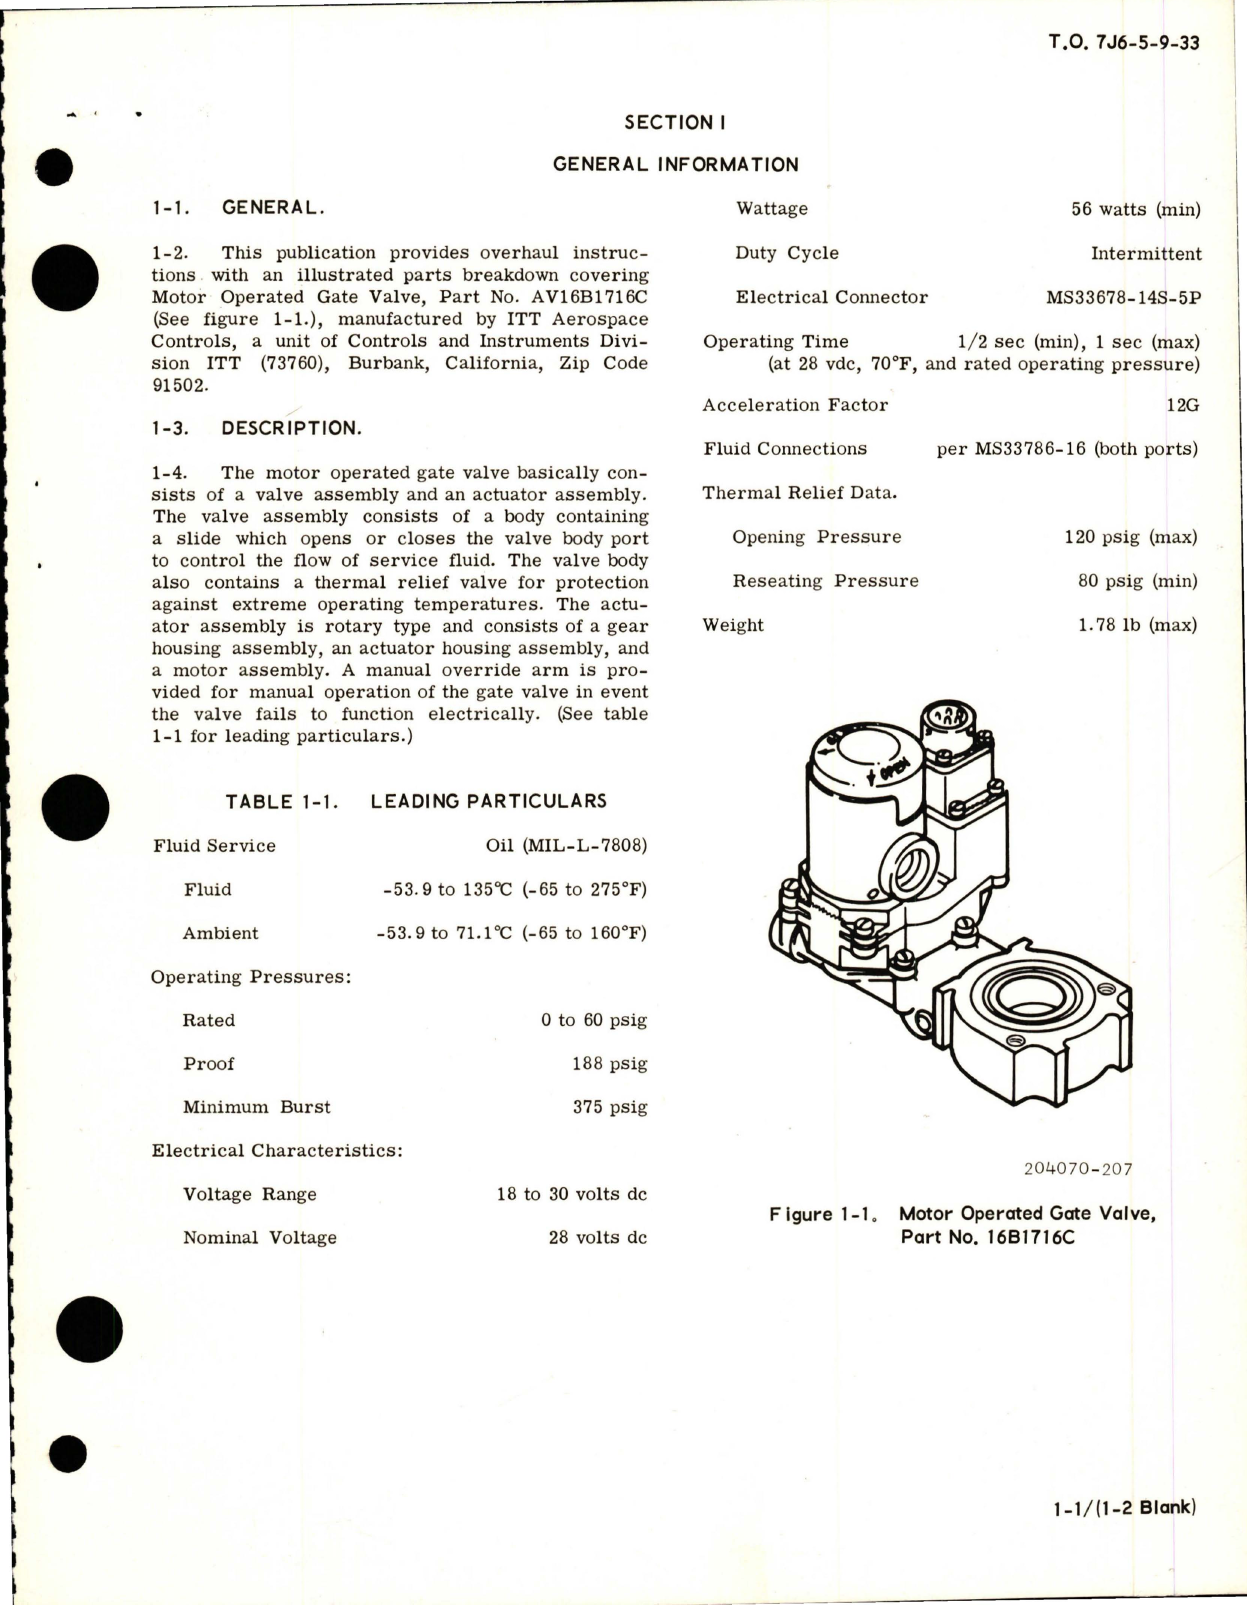 Sample page 5 from AirCorps Library document: Overhaul Instructions with Illustrated Parts Breakdown for Motor Operated Gate Valve - Part AV16B1716C